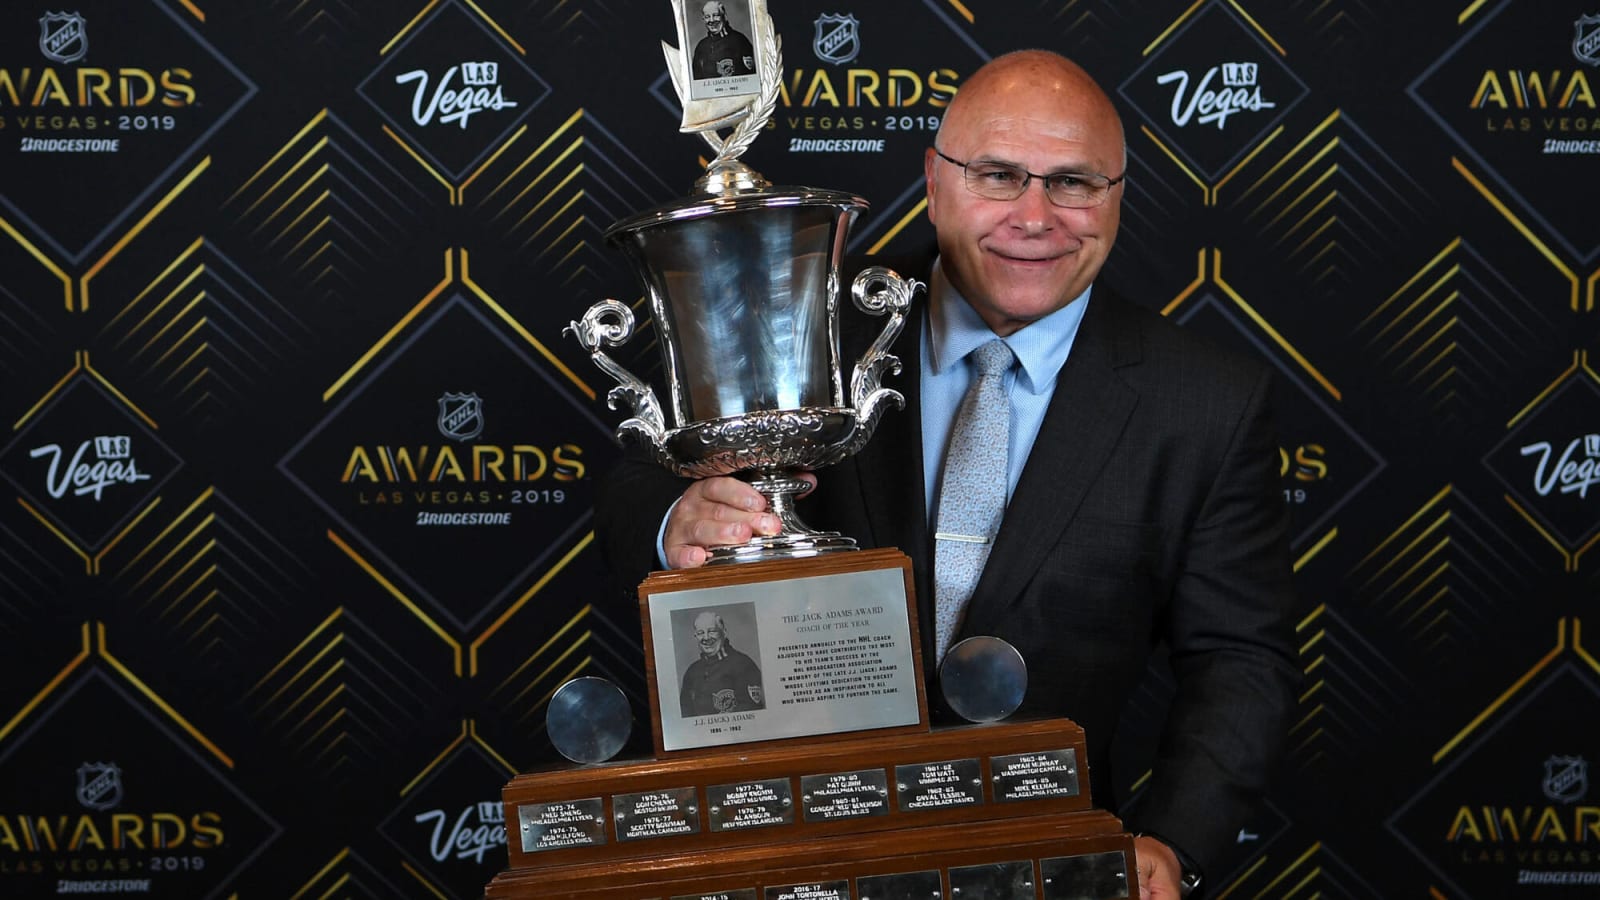 Report: Jets have interviewed Barry Trotz for head coaching position